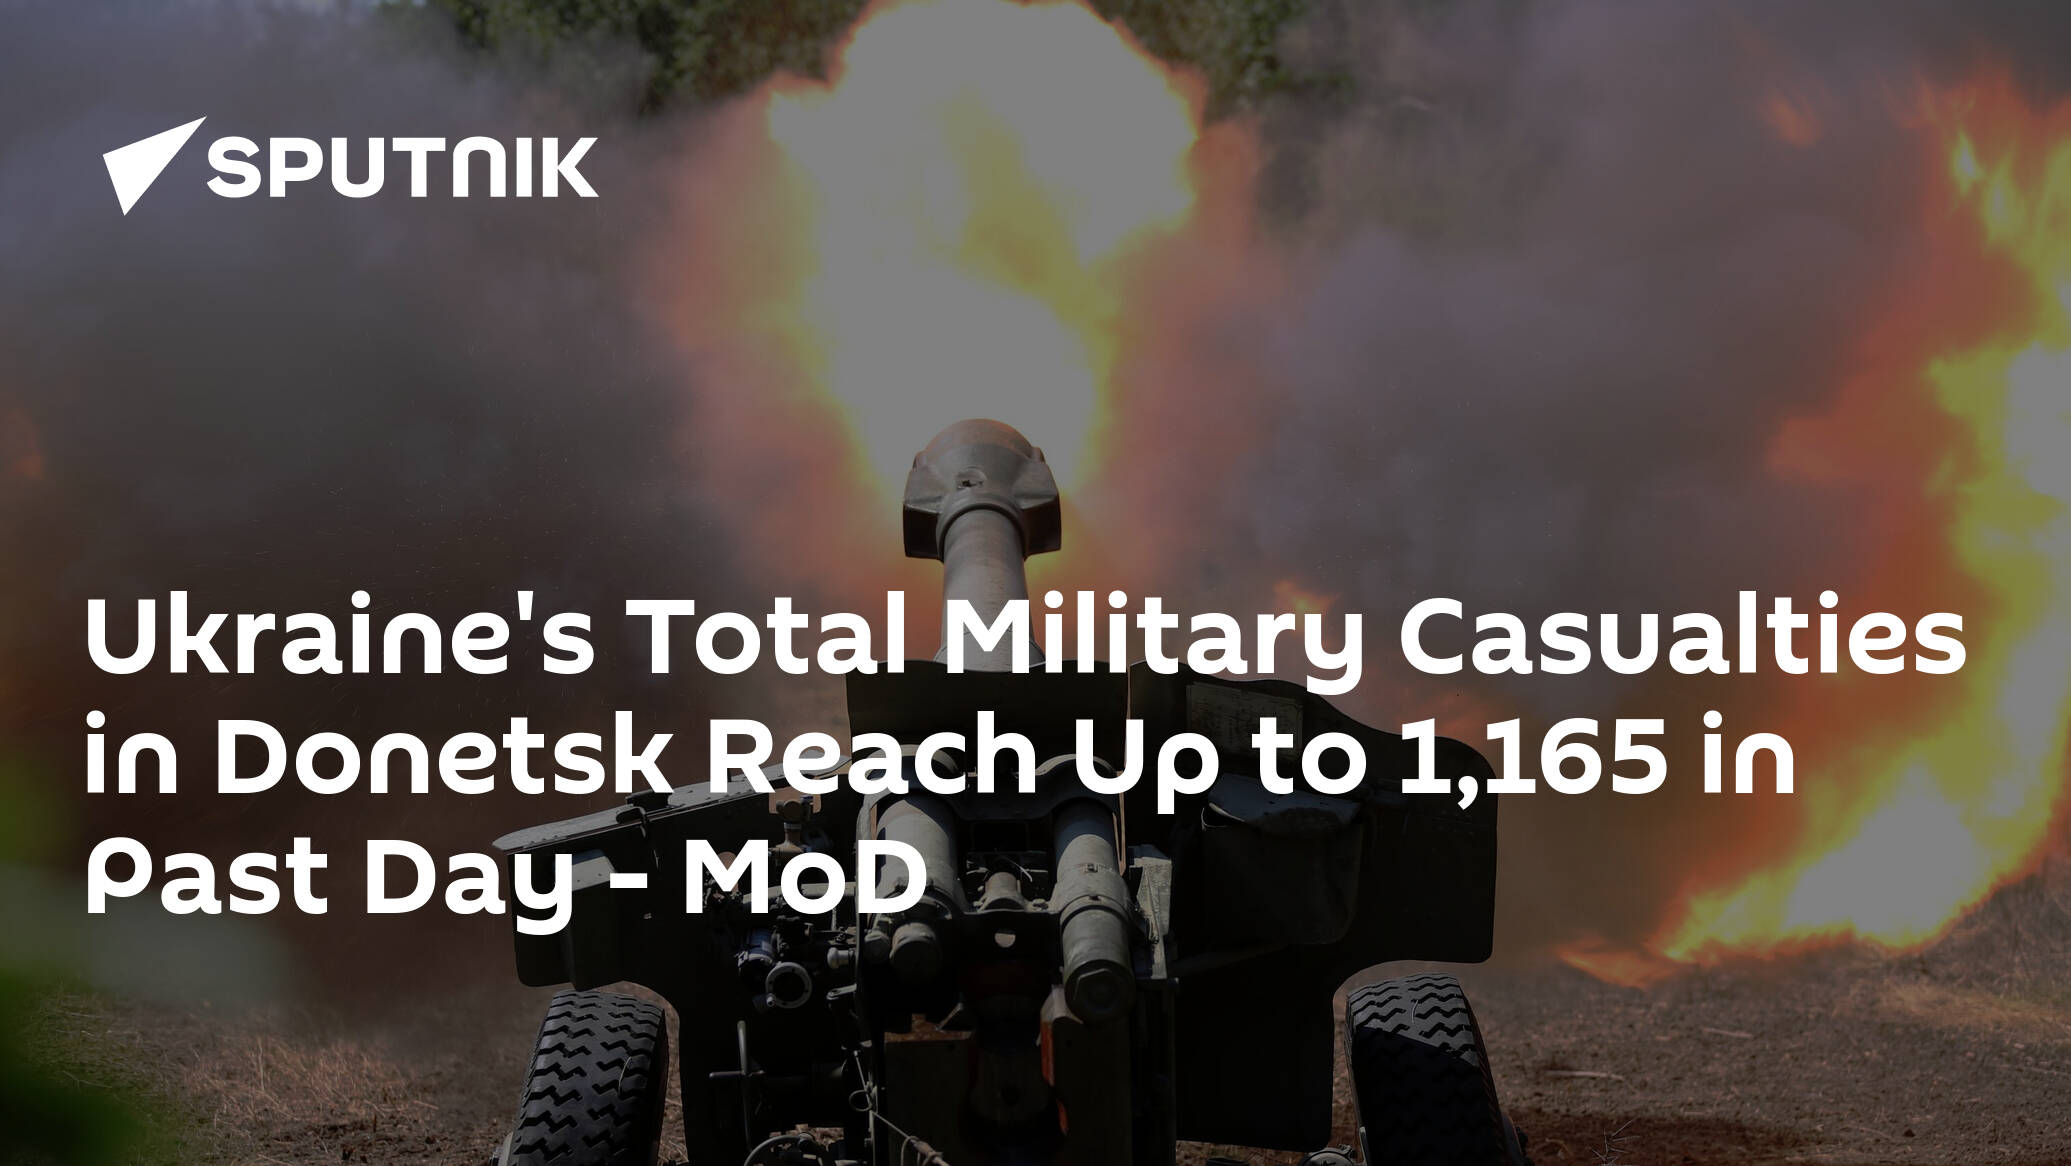 Ukraine's Total Military Casualties in Donetsk Reach Up to 1,165 in Past Day – MoD